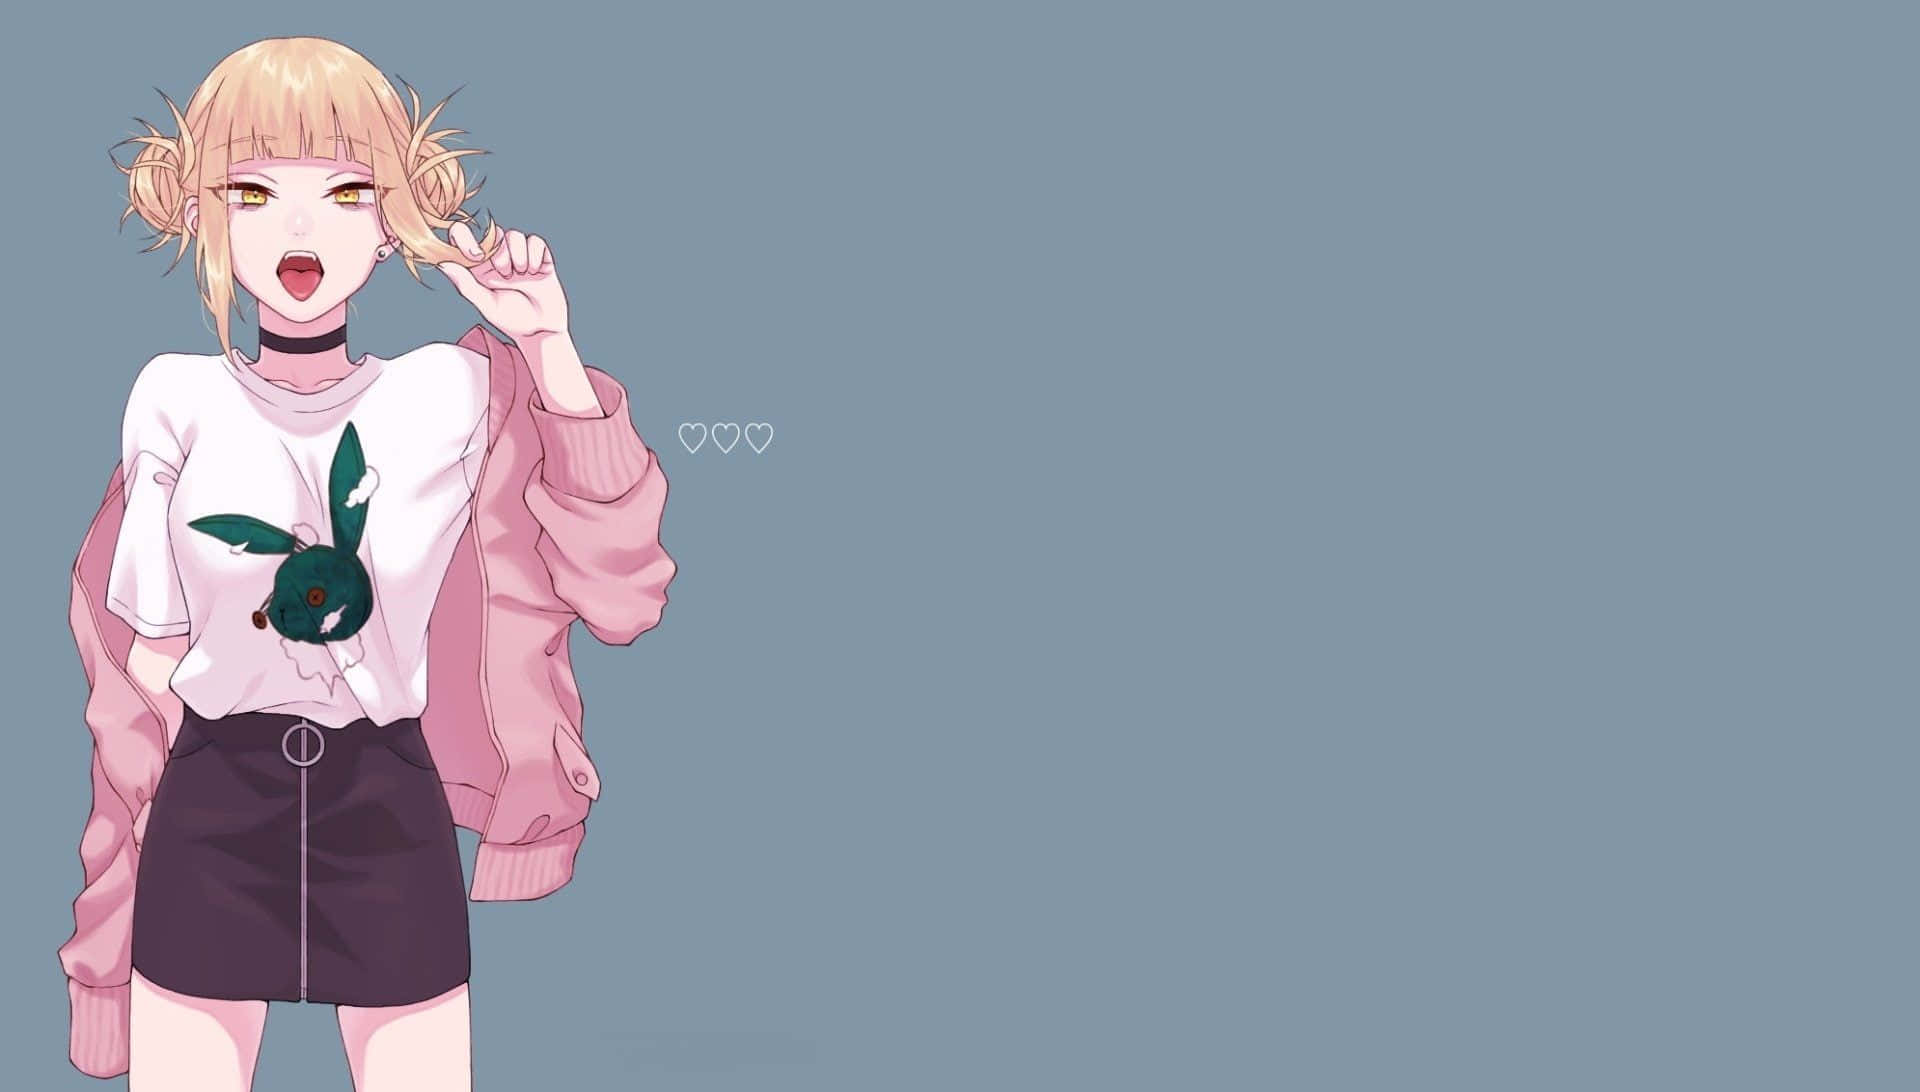 Himiko Toga Aesthetic With A Playboy Shirt Wallpaper